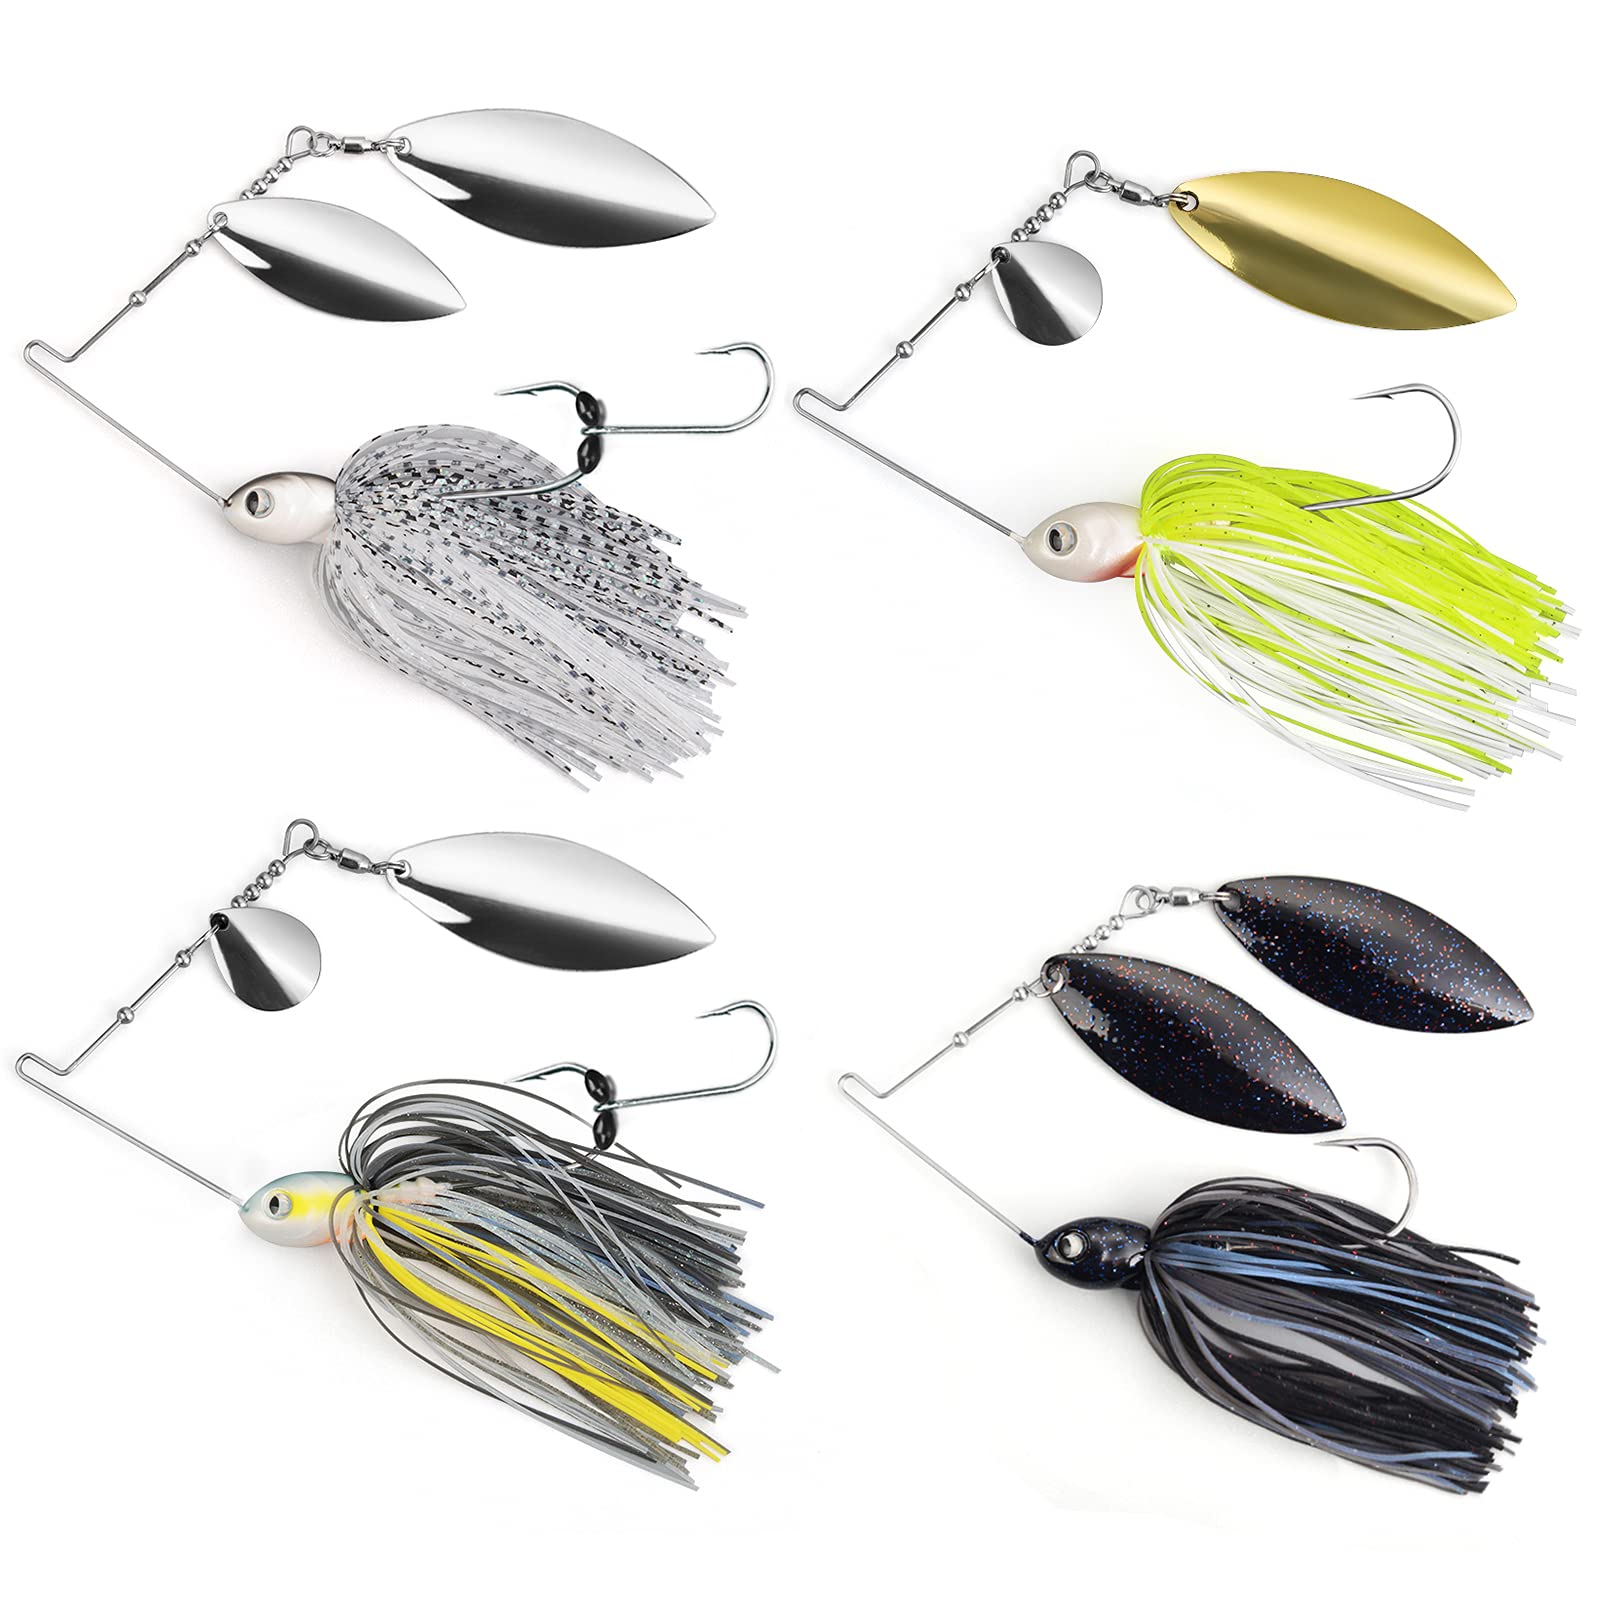 MadBite Spinnerbait Fishing Lures 4 pc Multi-Color Kits & 2 pc Kits  Colorado & Willow